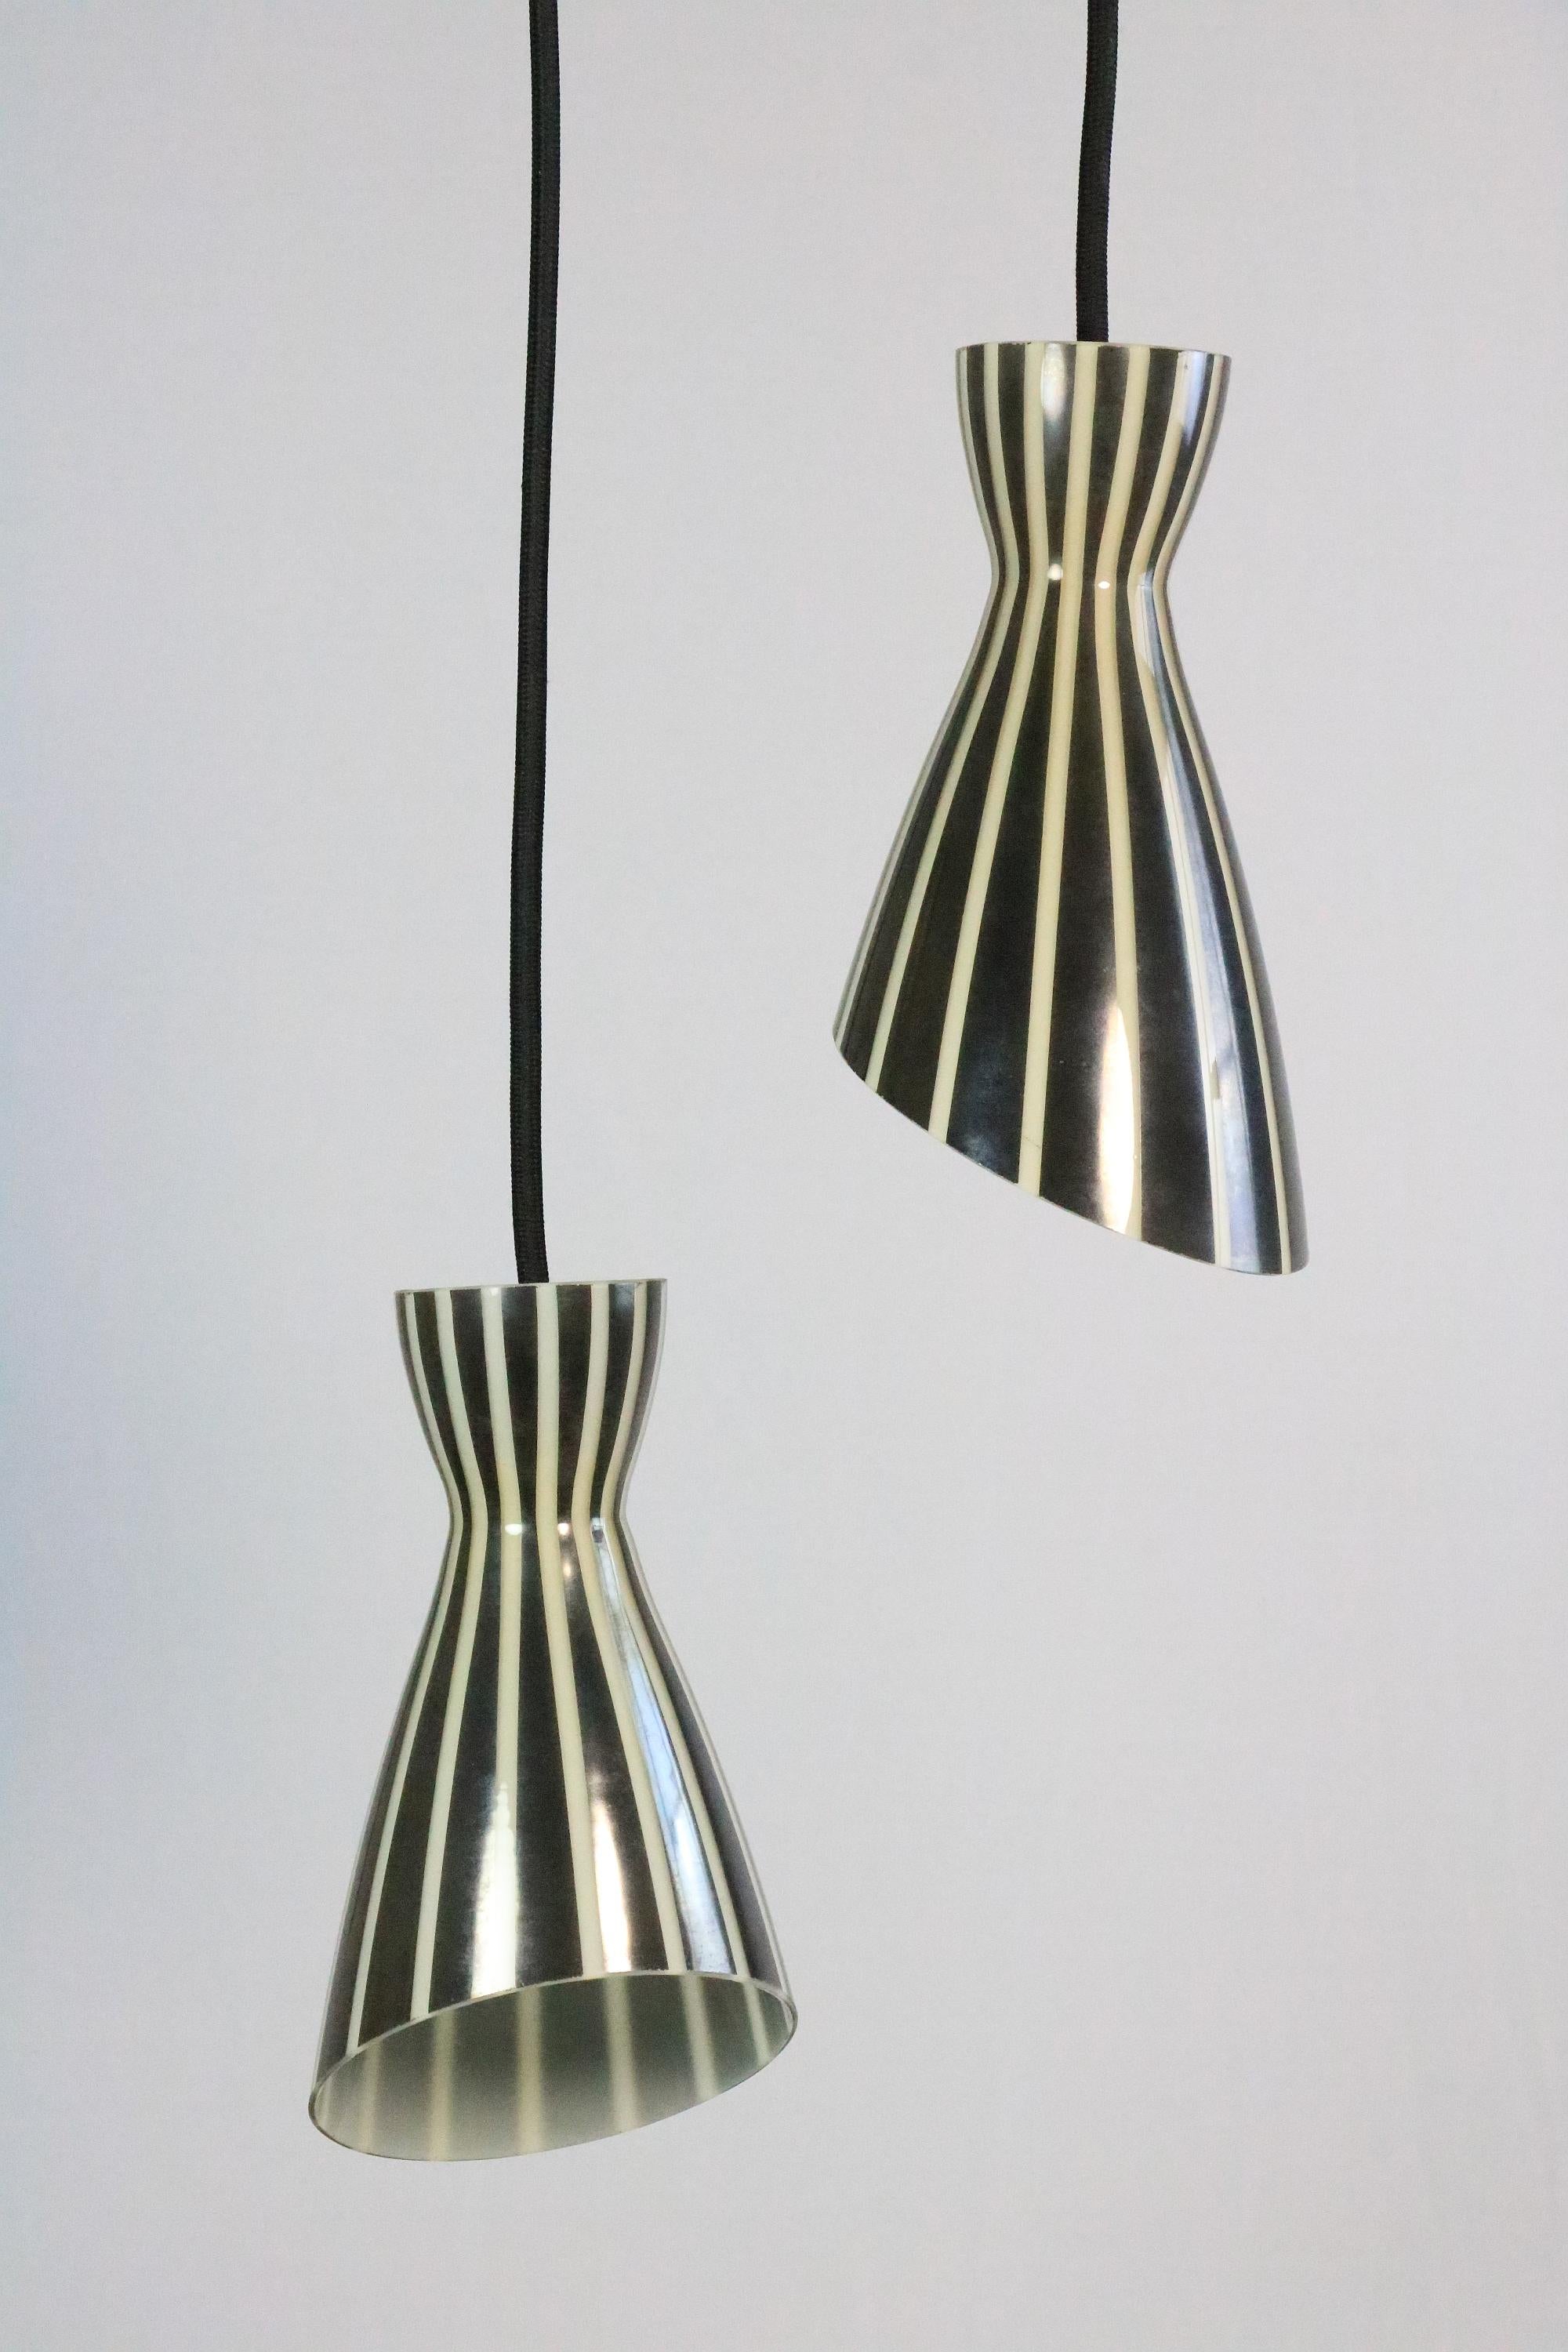 Set of 2 Glass Hanging Lamps, Black and White Striped, Original 1950s For Sale 1